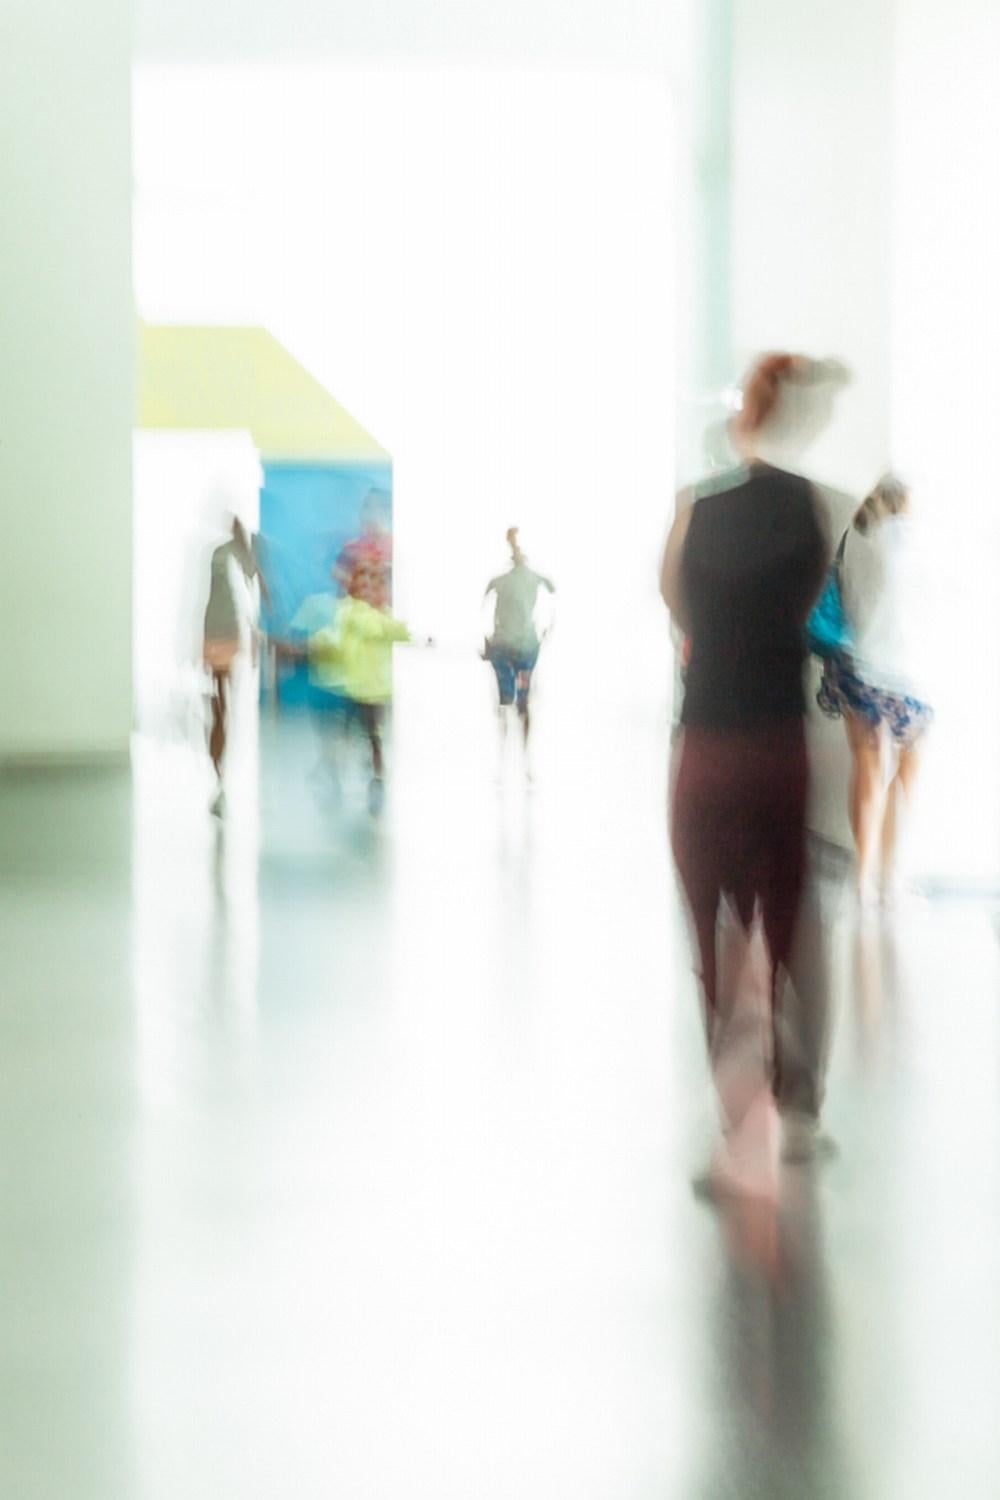 Untitled #21 (from Unfocused Series) - Photograph by Anne K Smith